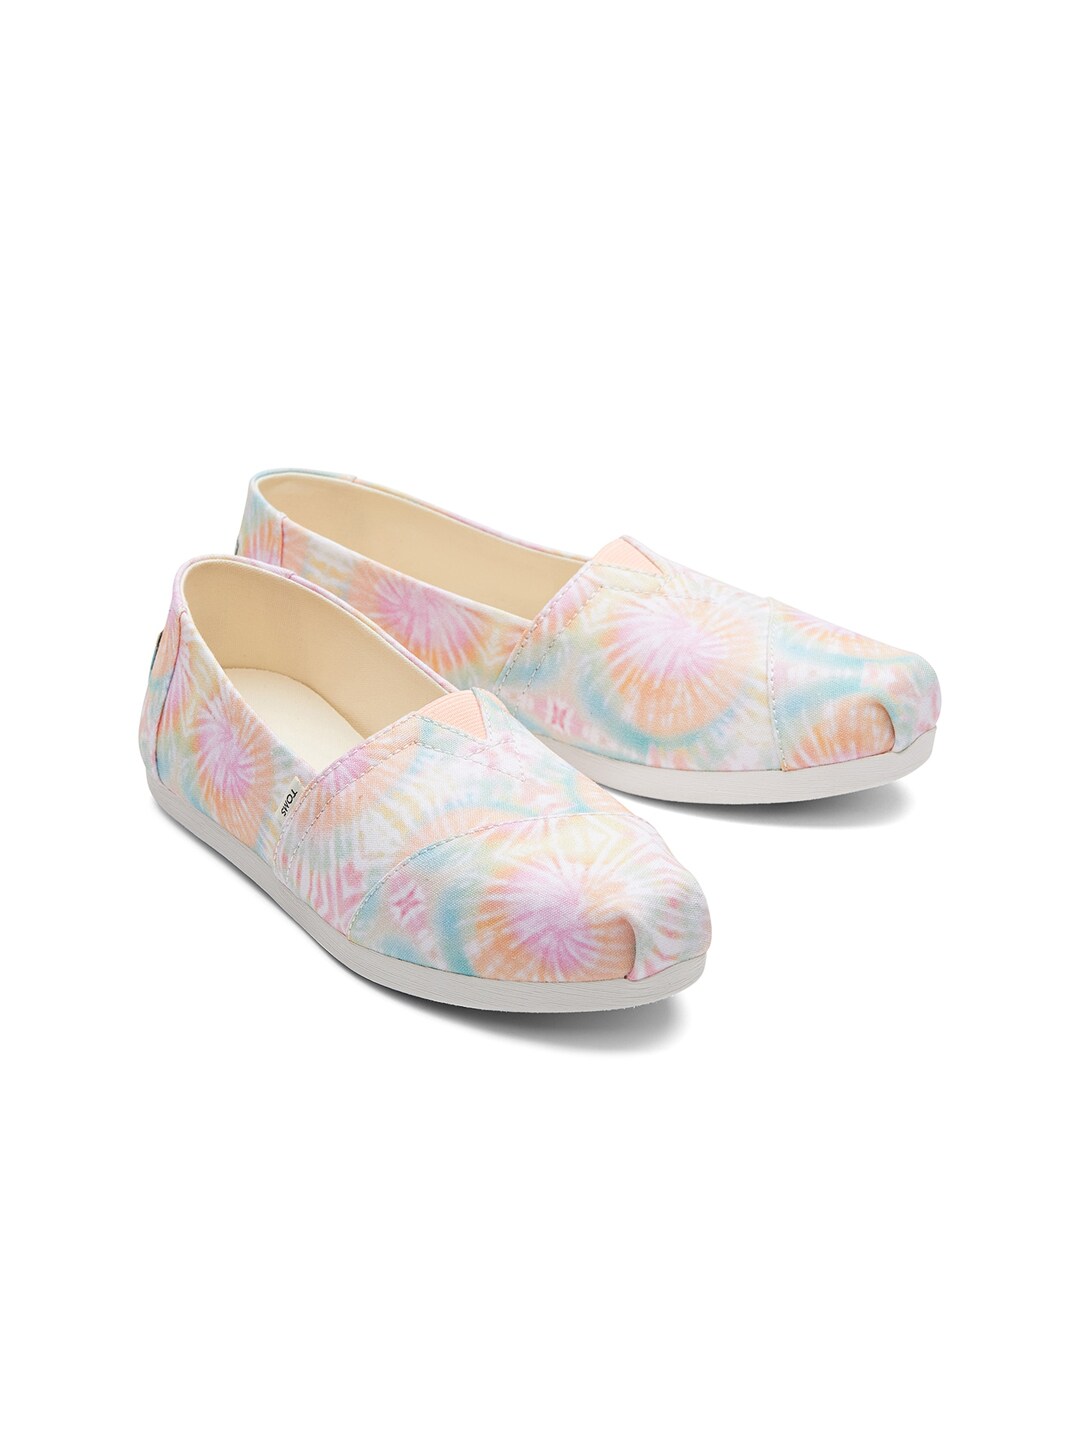 TOMS Women Pink Printed Alpargata Tie & Dye Canvas Slip-On Sneakers Price in India